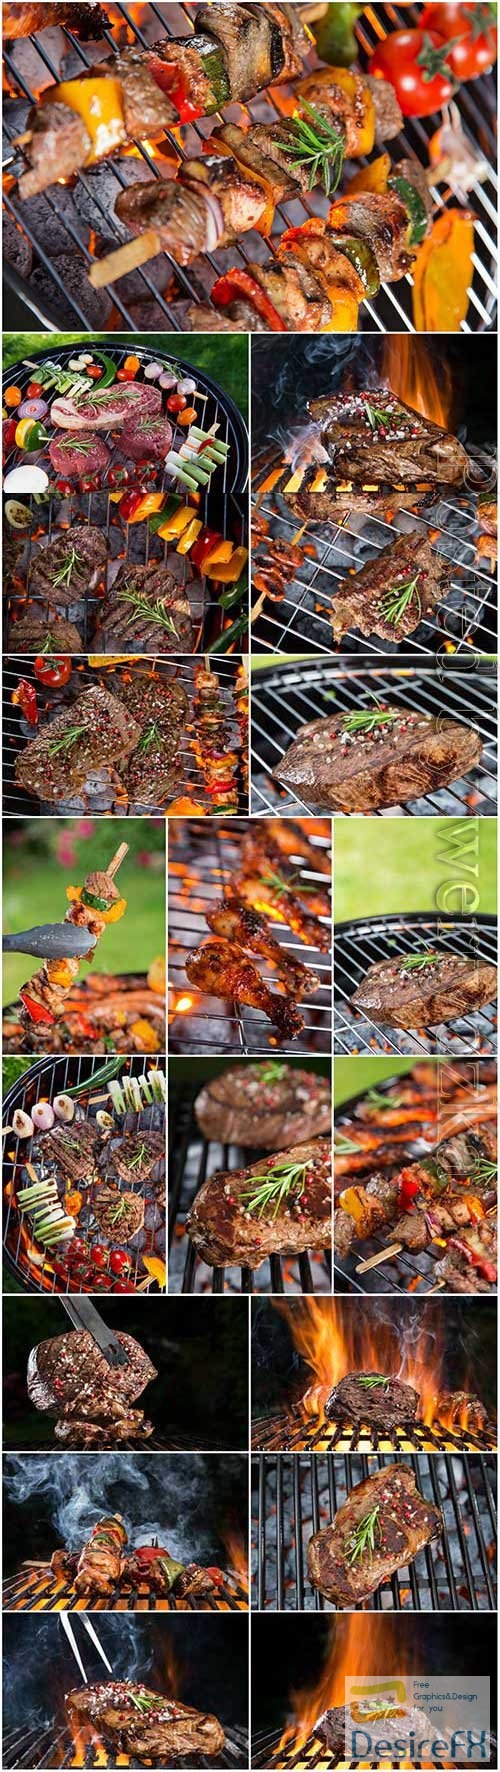 Grilled meat and vegetables stock photo